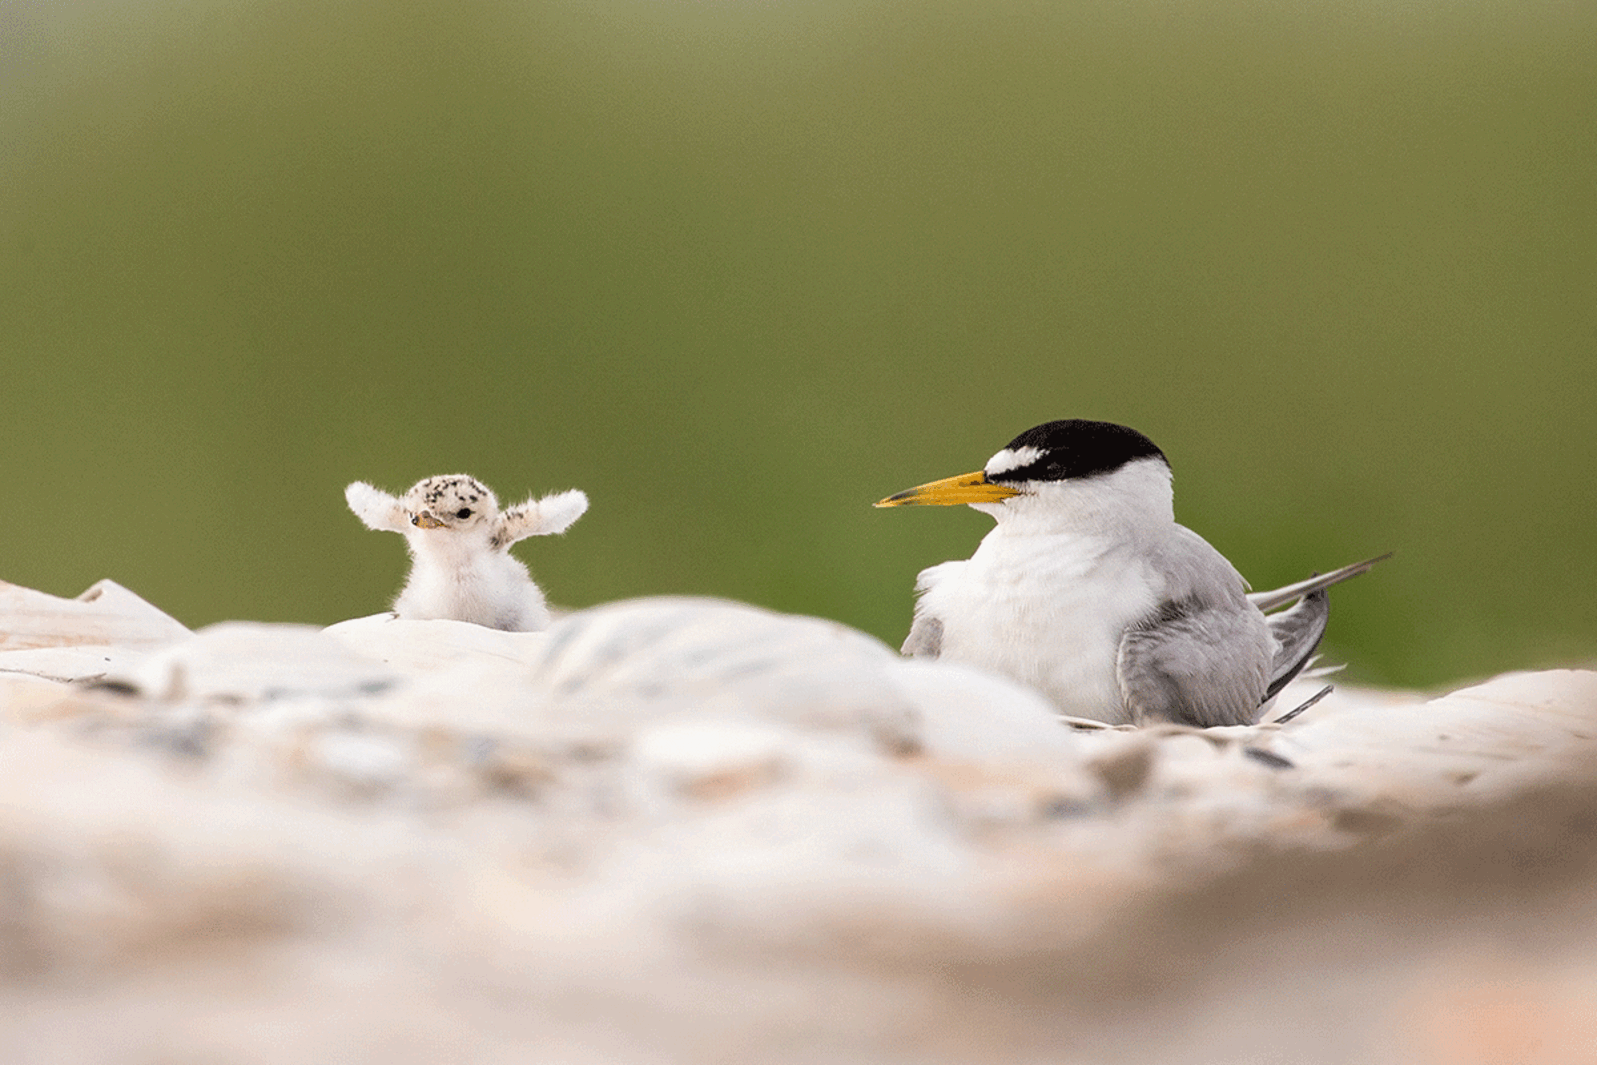 A least tern sits in a nest next two a small chick stretching its wings.